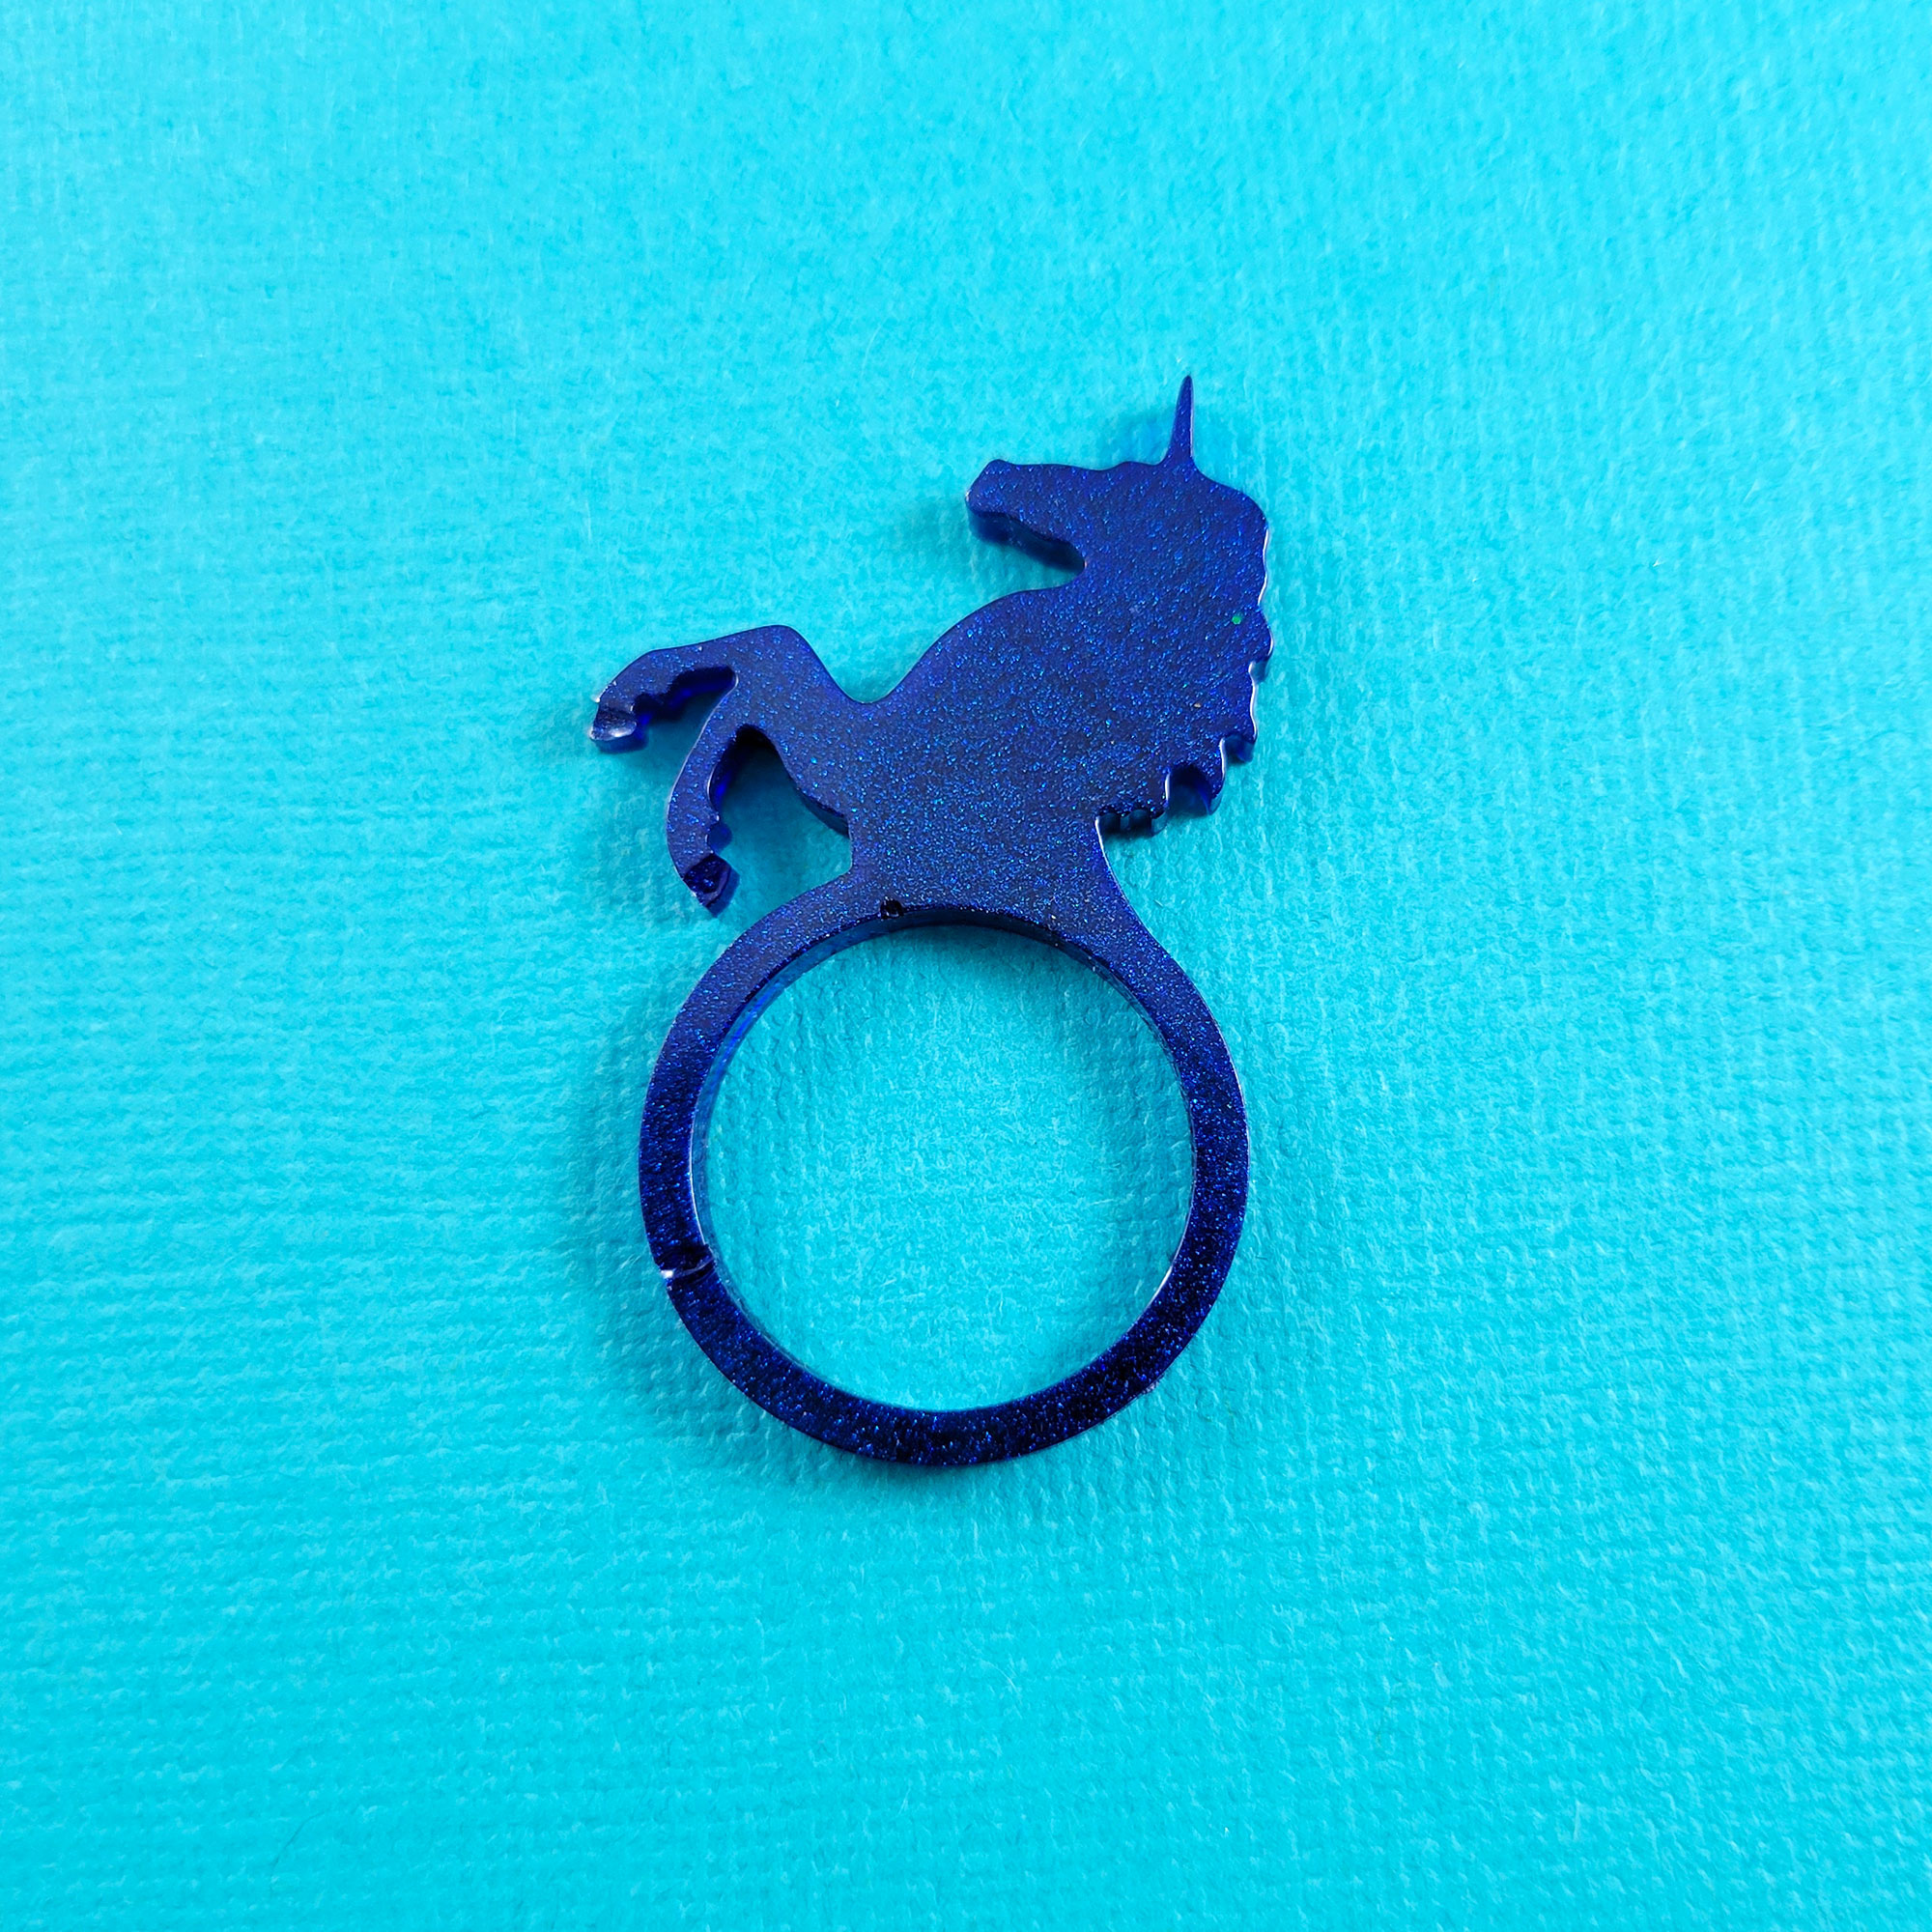 Magical Unicorn Ring by Wilde Designs